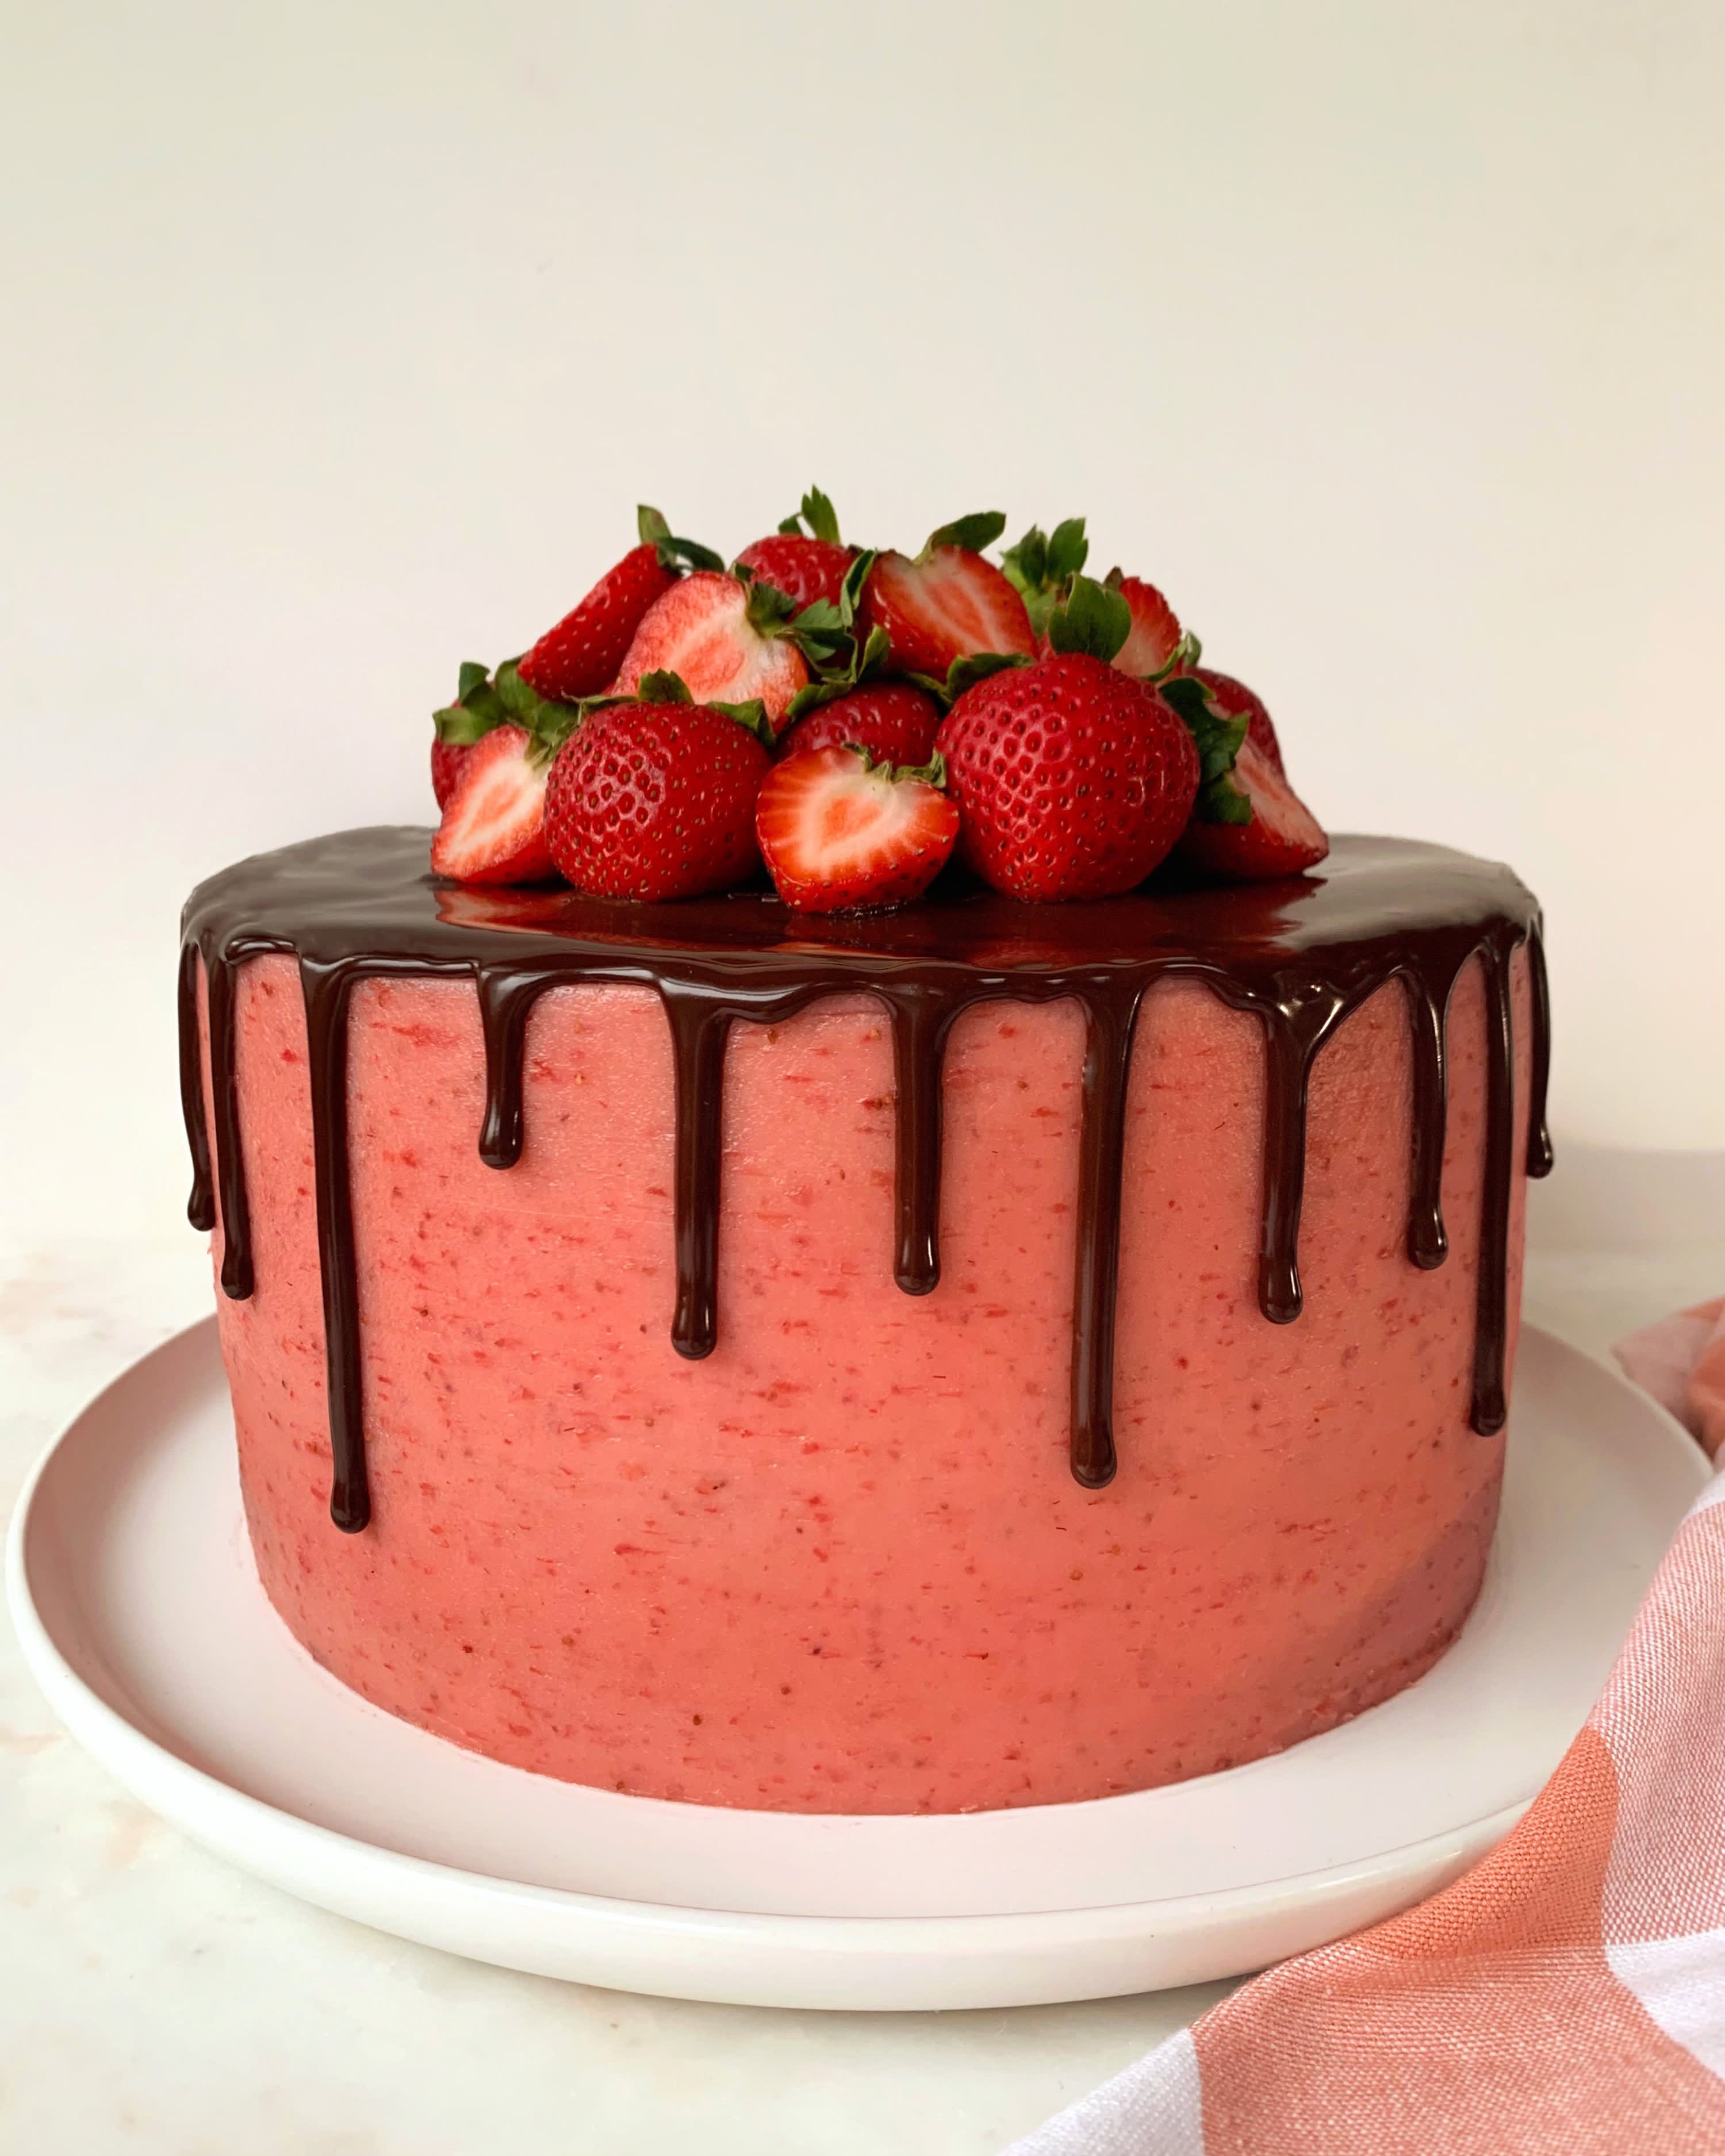 Strawberry Cake - Grandmother's Favorite, with real strawberries inside!